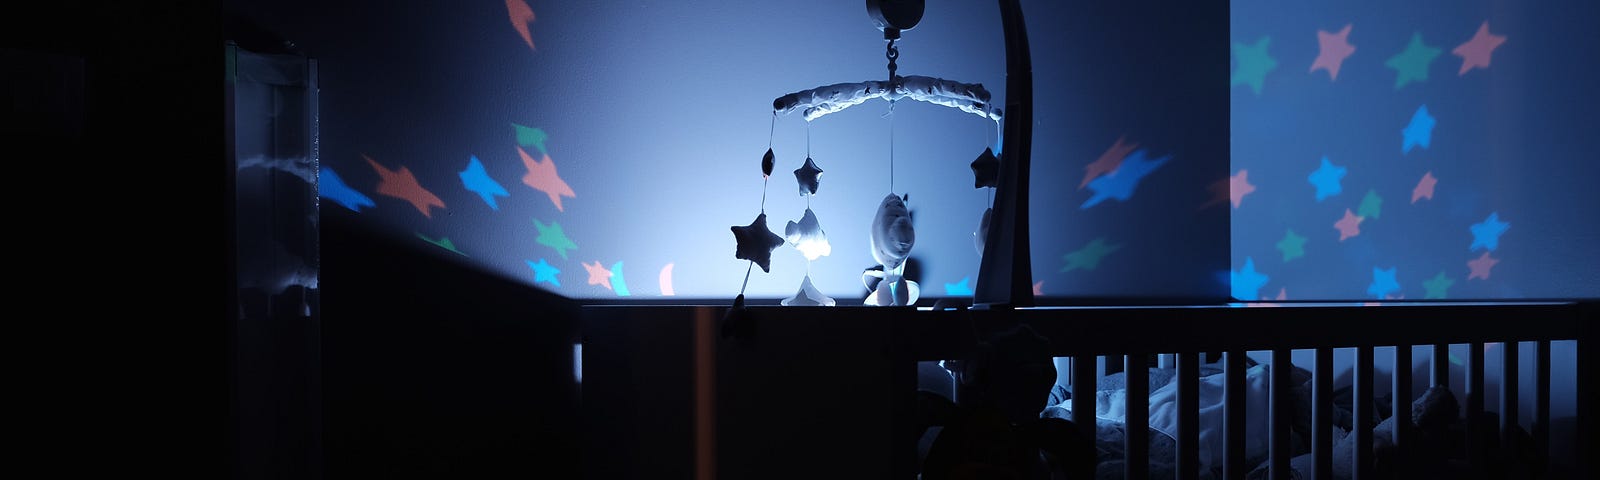 Photo: A crib is visible only as a dark silhouette in a deep blue room. A nightlight projects stars onto the surrounding walls.